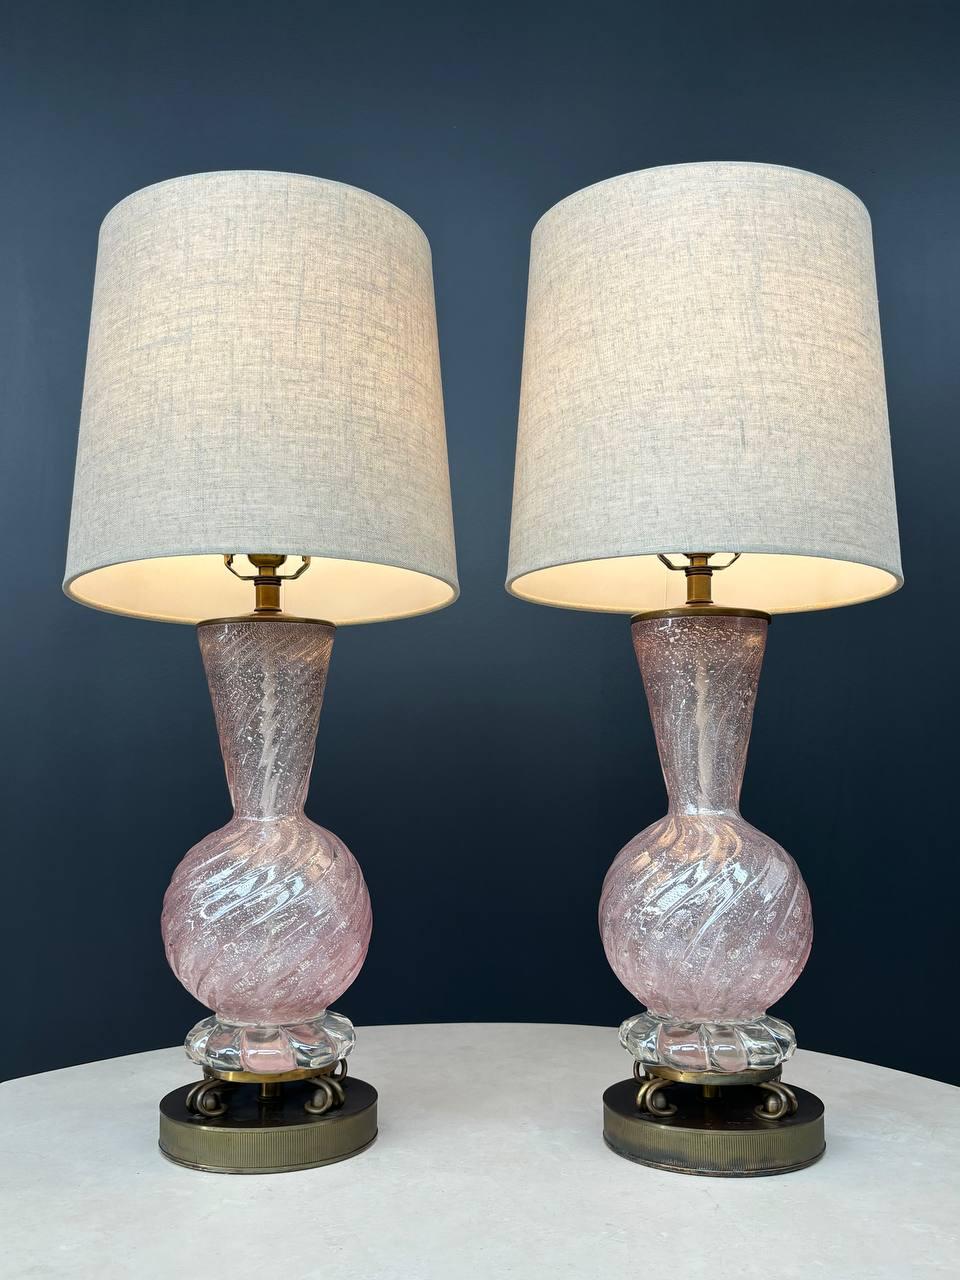 Condition: Newly Rewired, New Shade

Materials: Pink Italian Murano, Patinated Brass

Lamps:
29”H x 7”W x 7”D
Shade:
11.50